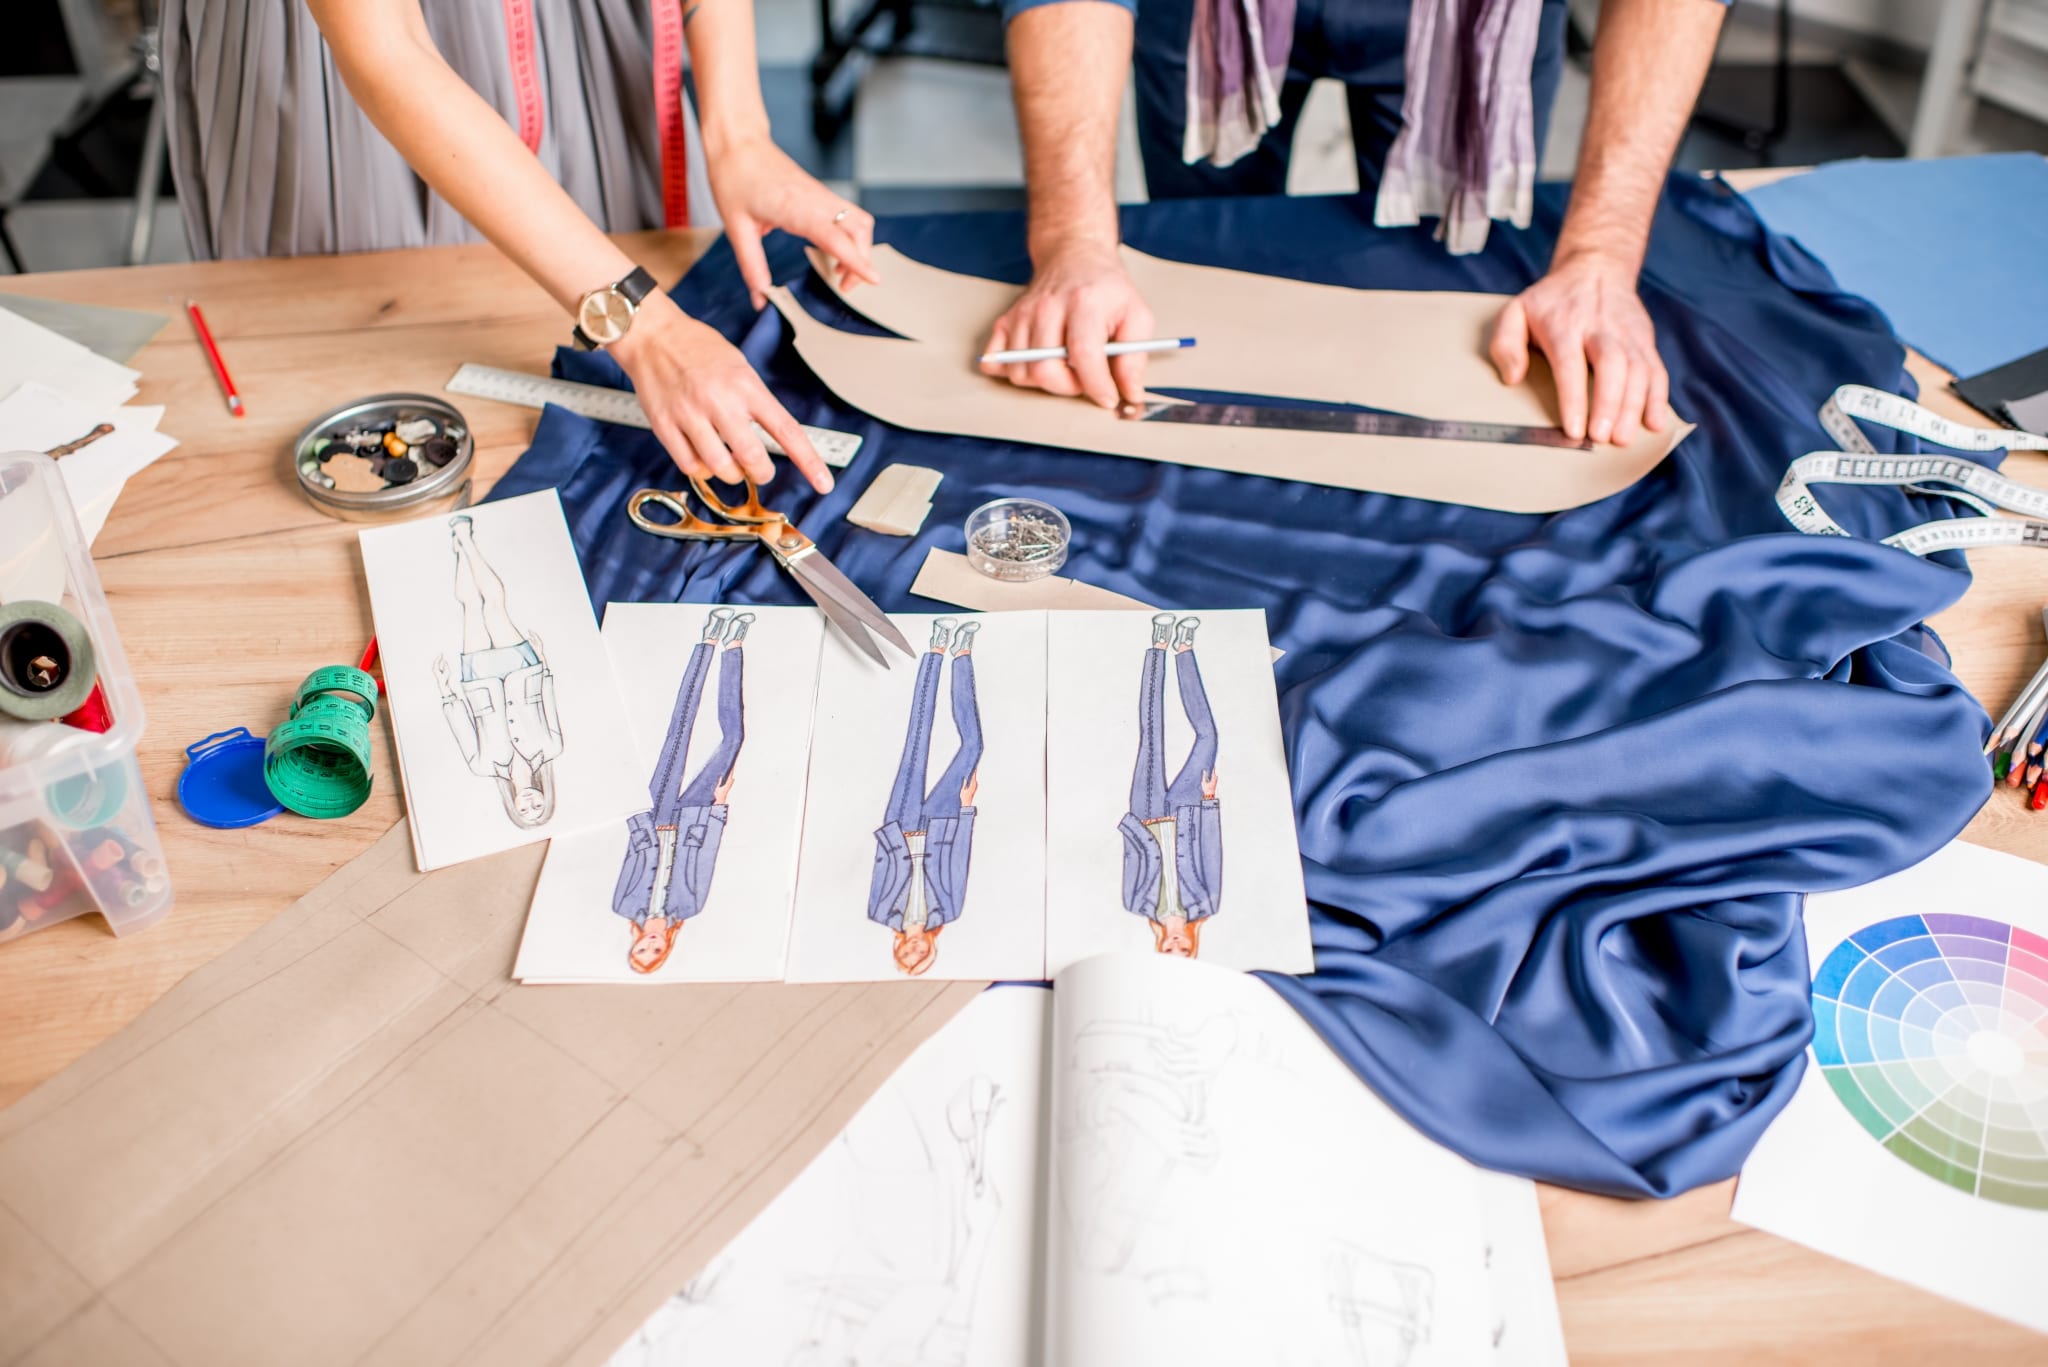 How To Become Successful In The Fashion Industry - StrategyDriven